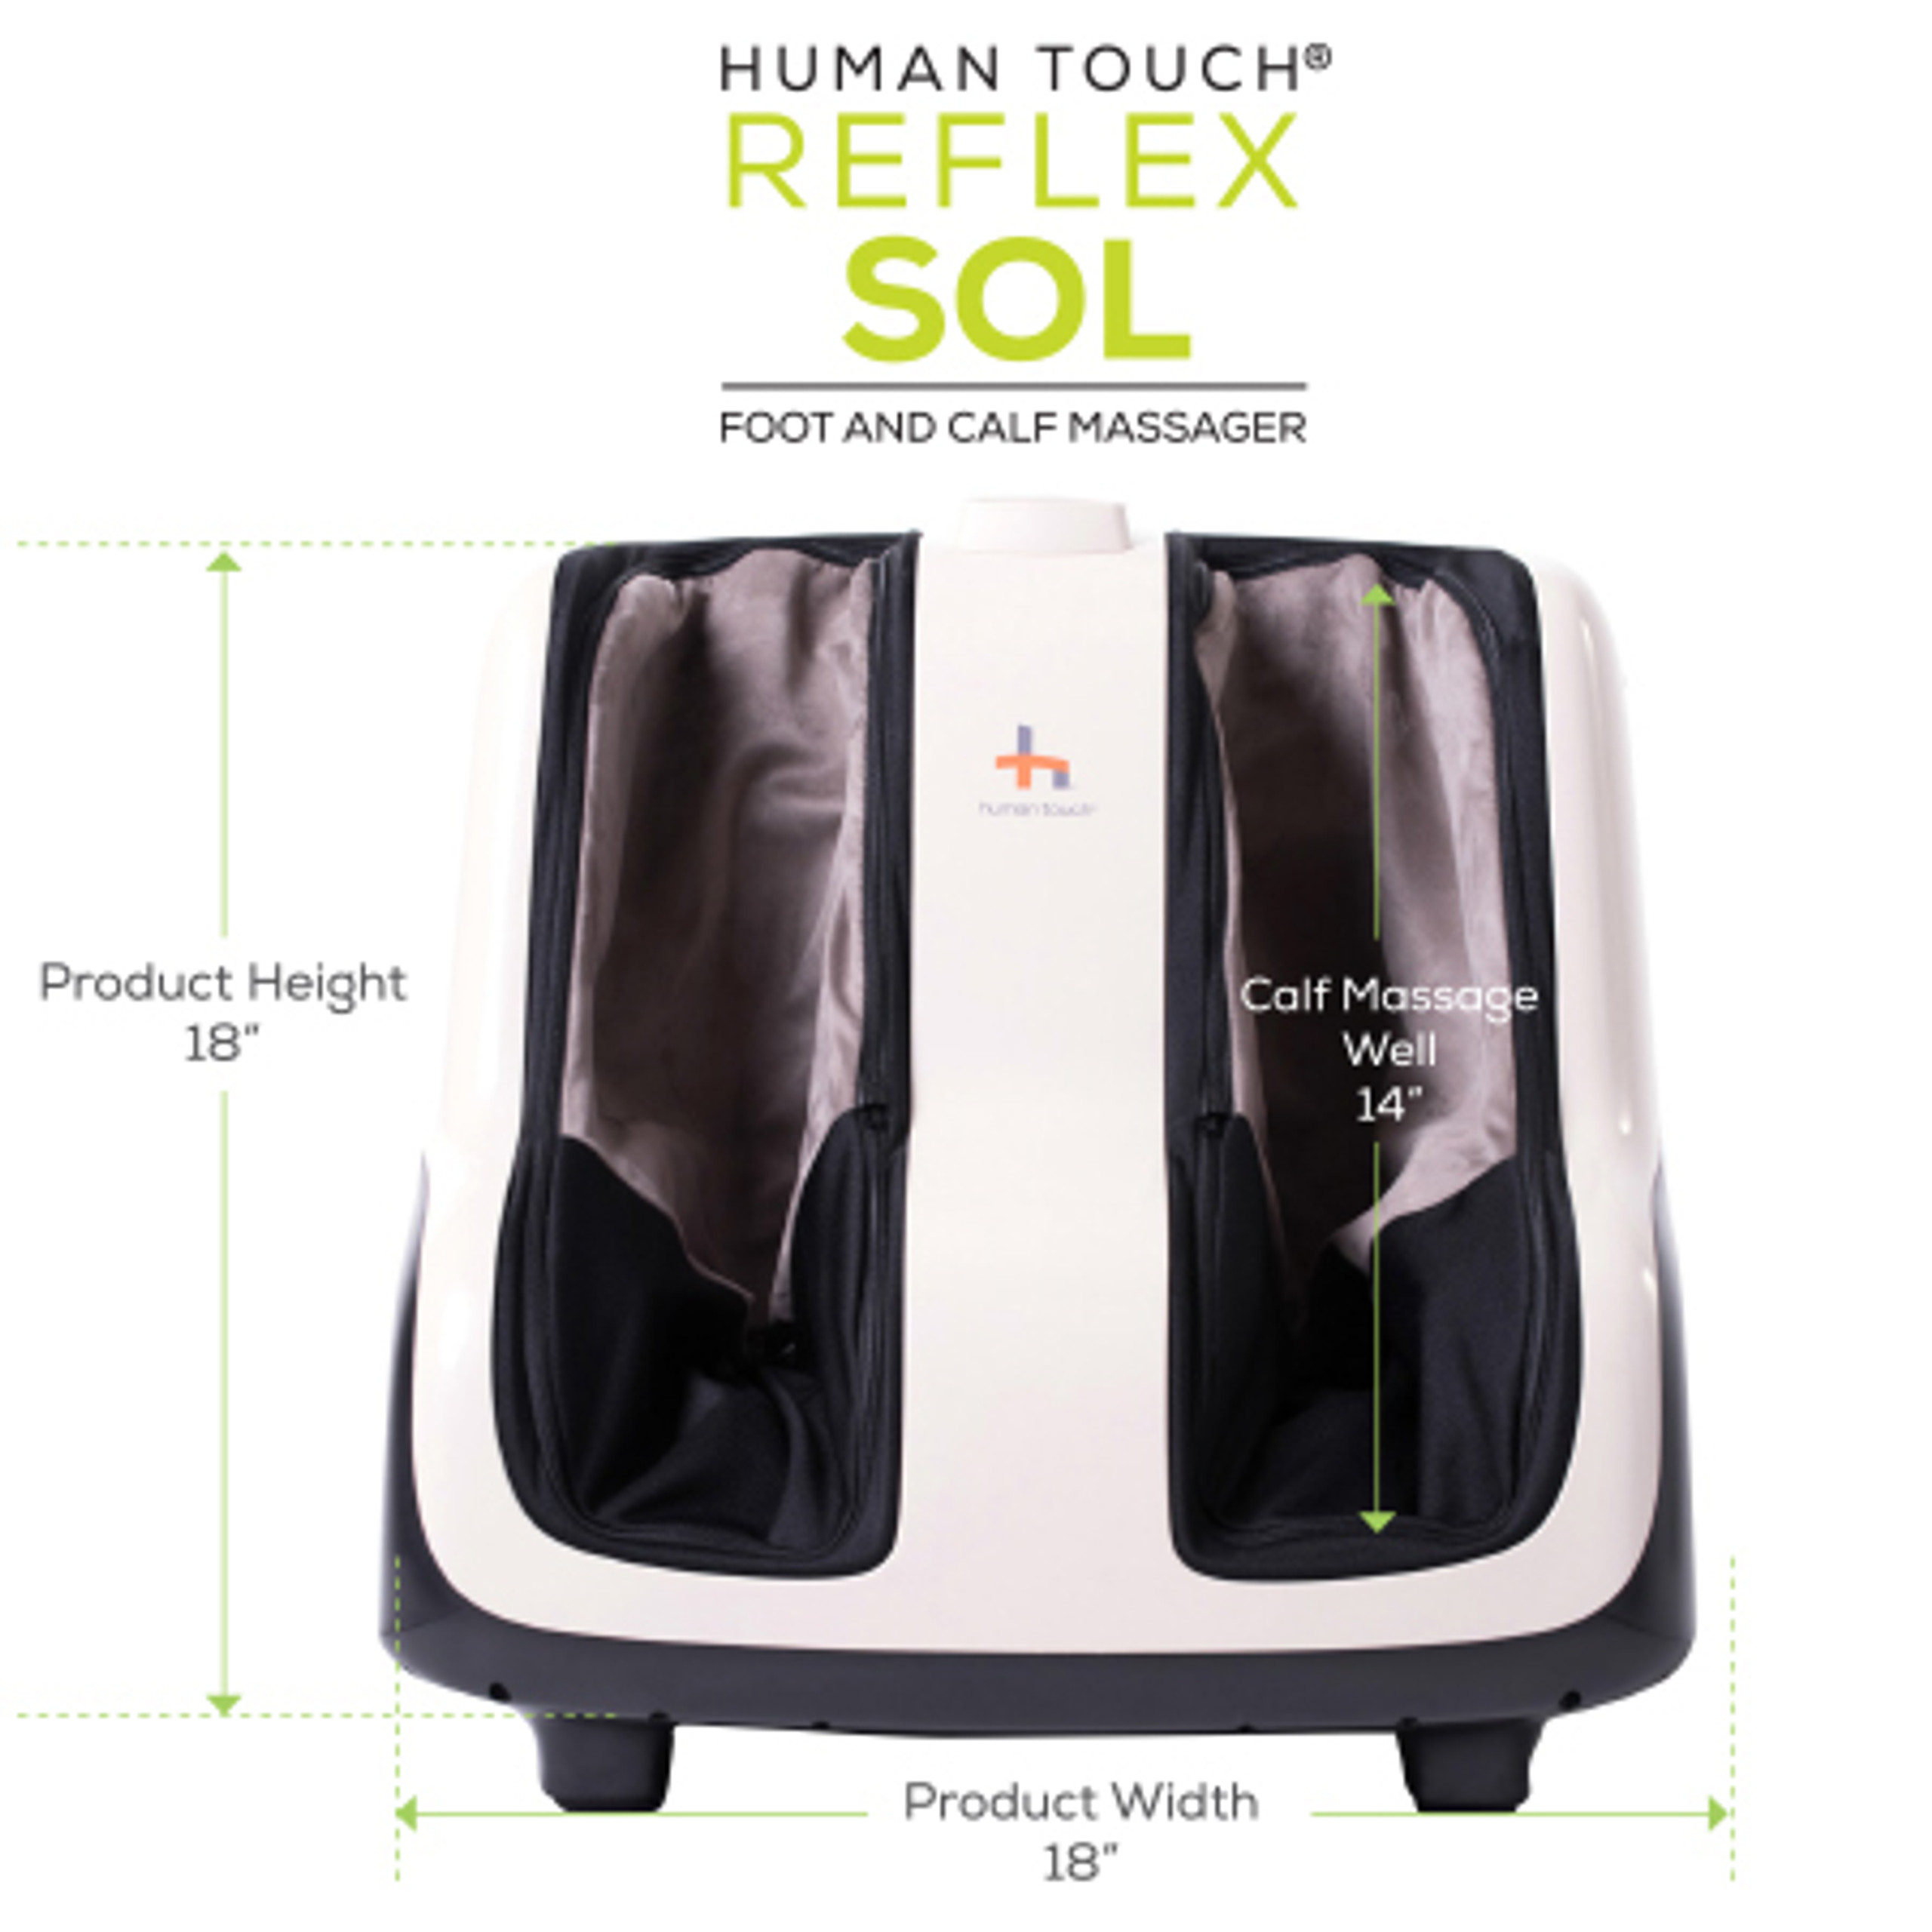 Reflex Sol Foot And Calf Massage By Human Touch